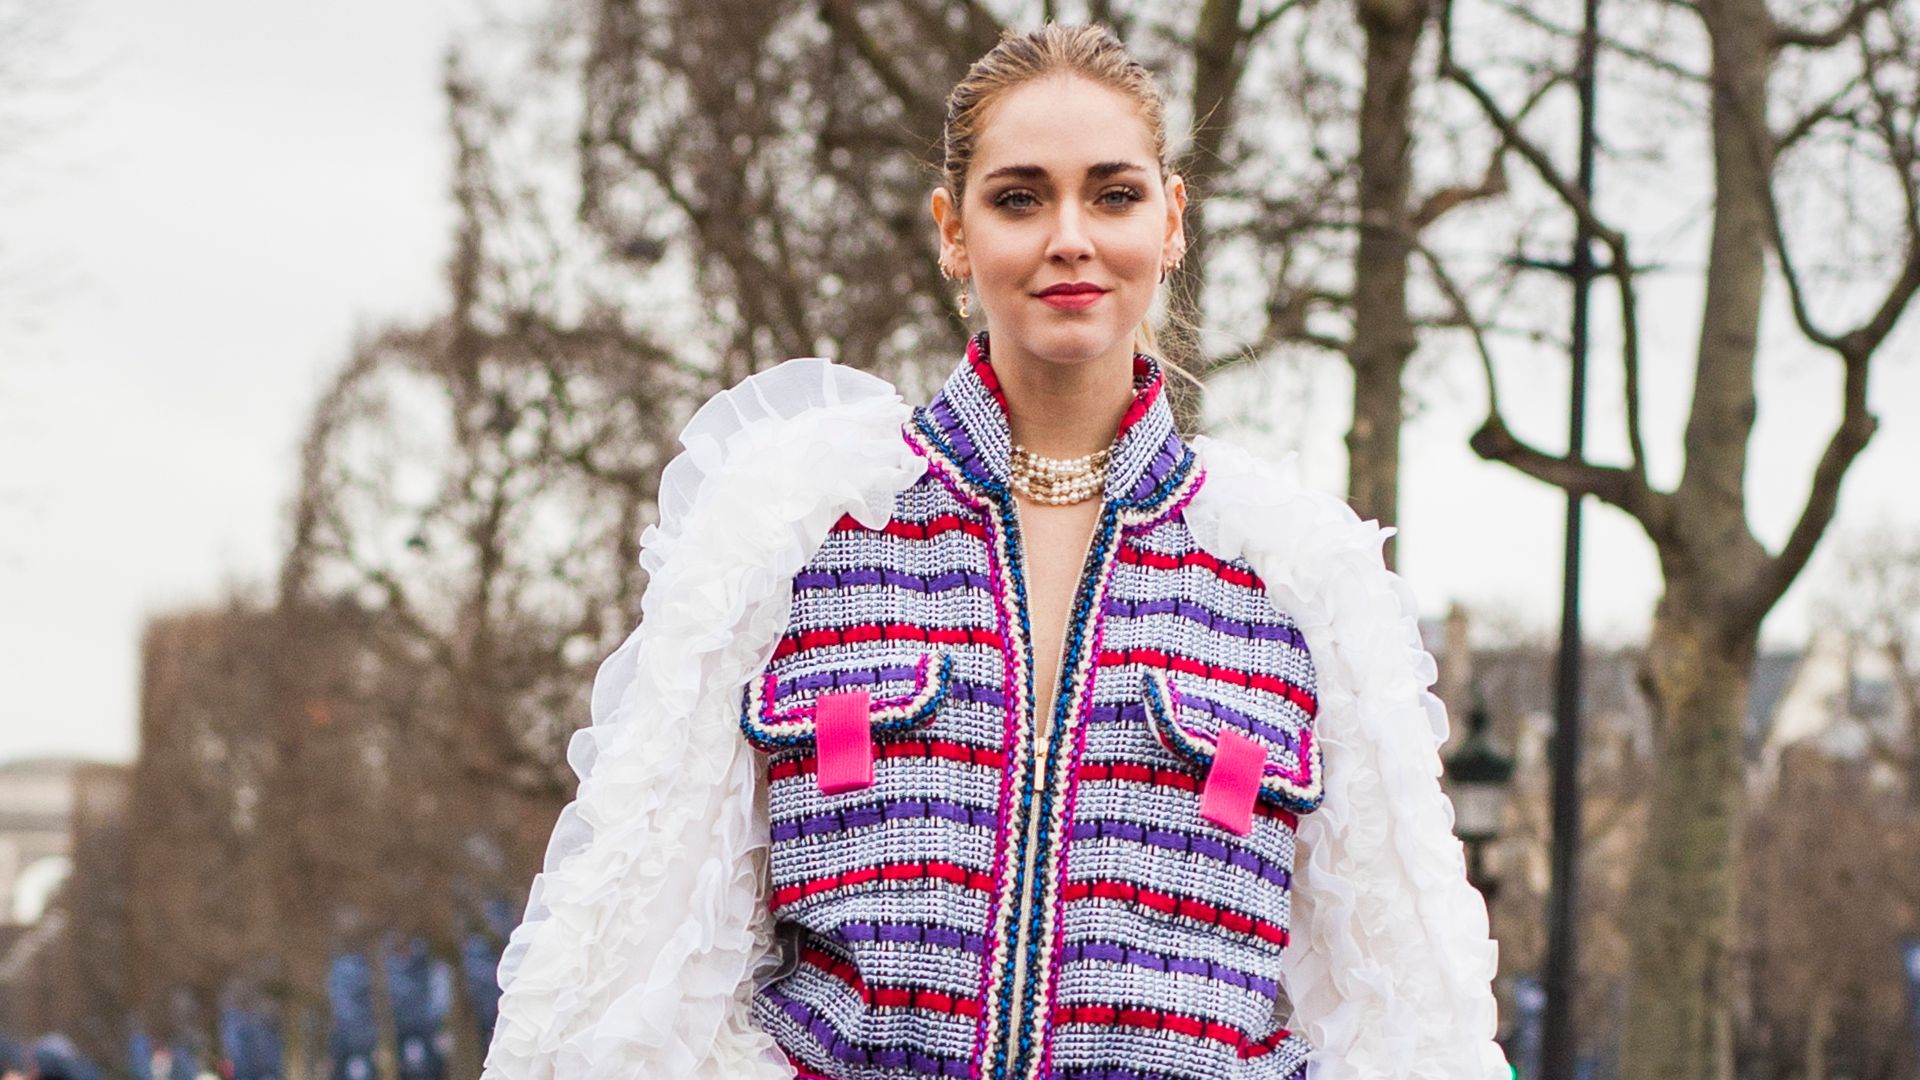 Chiara Ferragni is seen before the Chanel show at the Grand Palais during Paris Fashion Week Womenswear Fall/Winter 2017/2018  on March 7, 2017 in Paris, France.  (Photo by Claudio Lavenia/Getty Images)